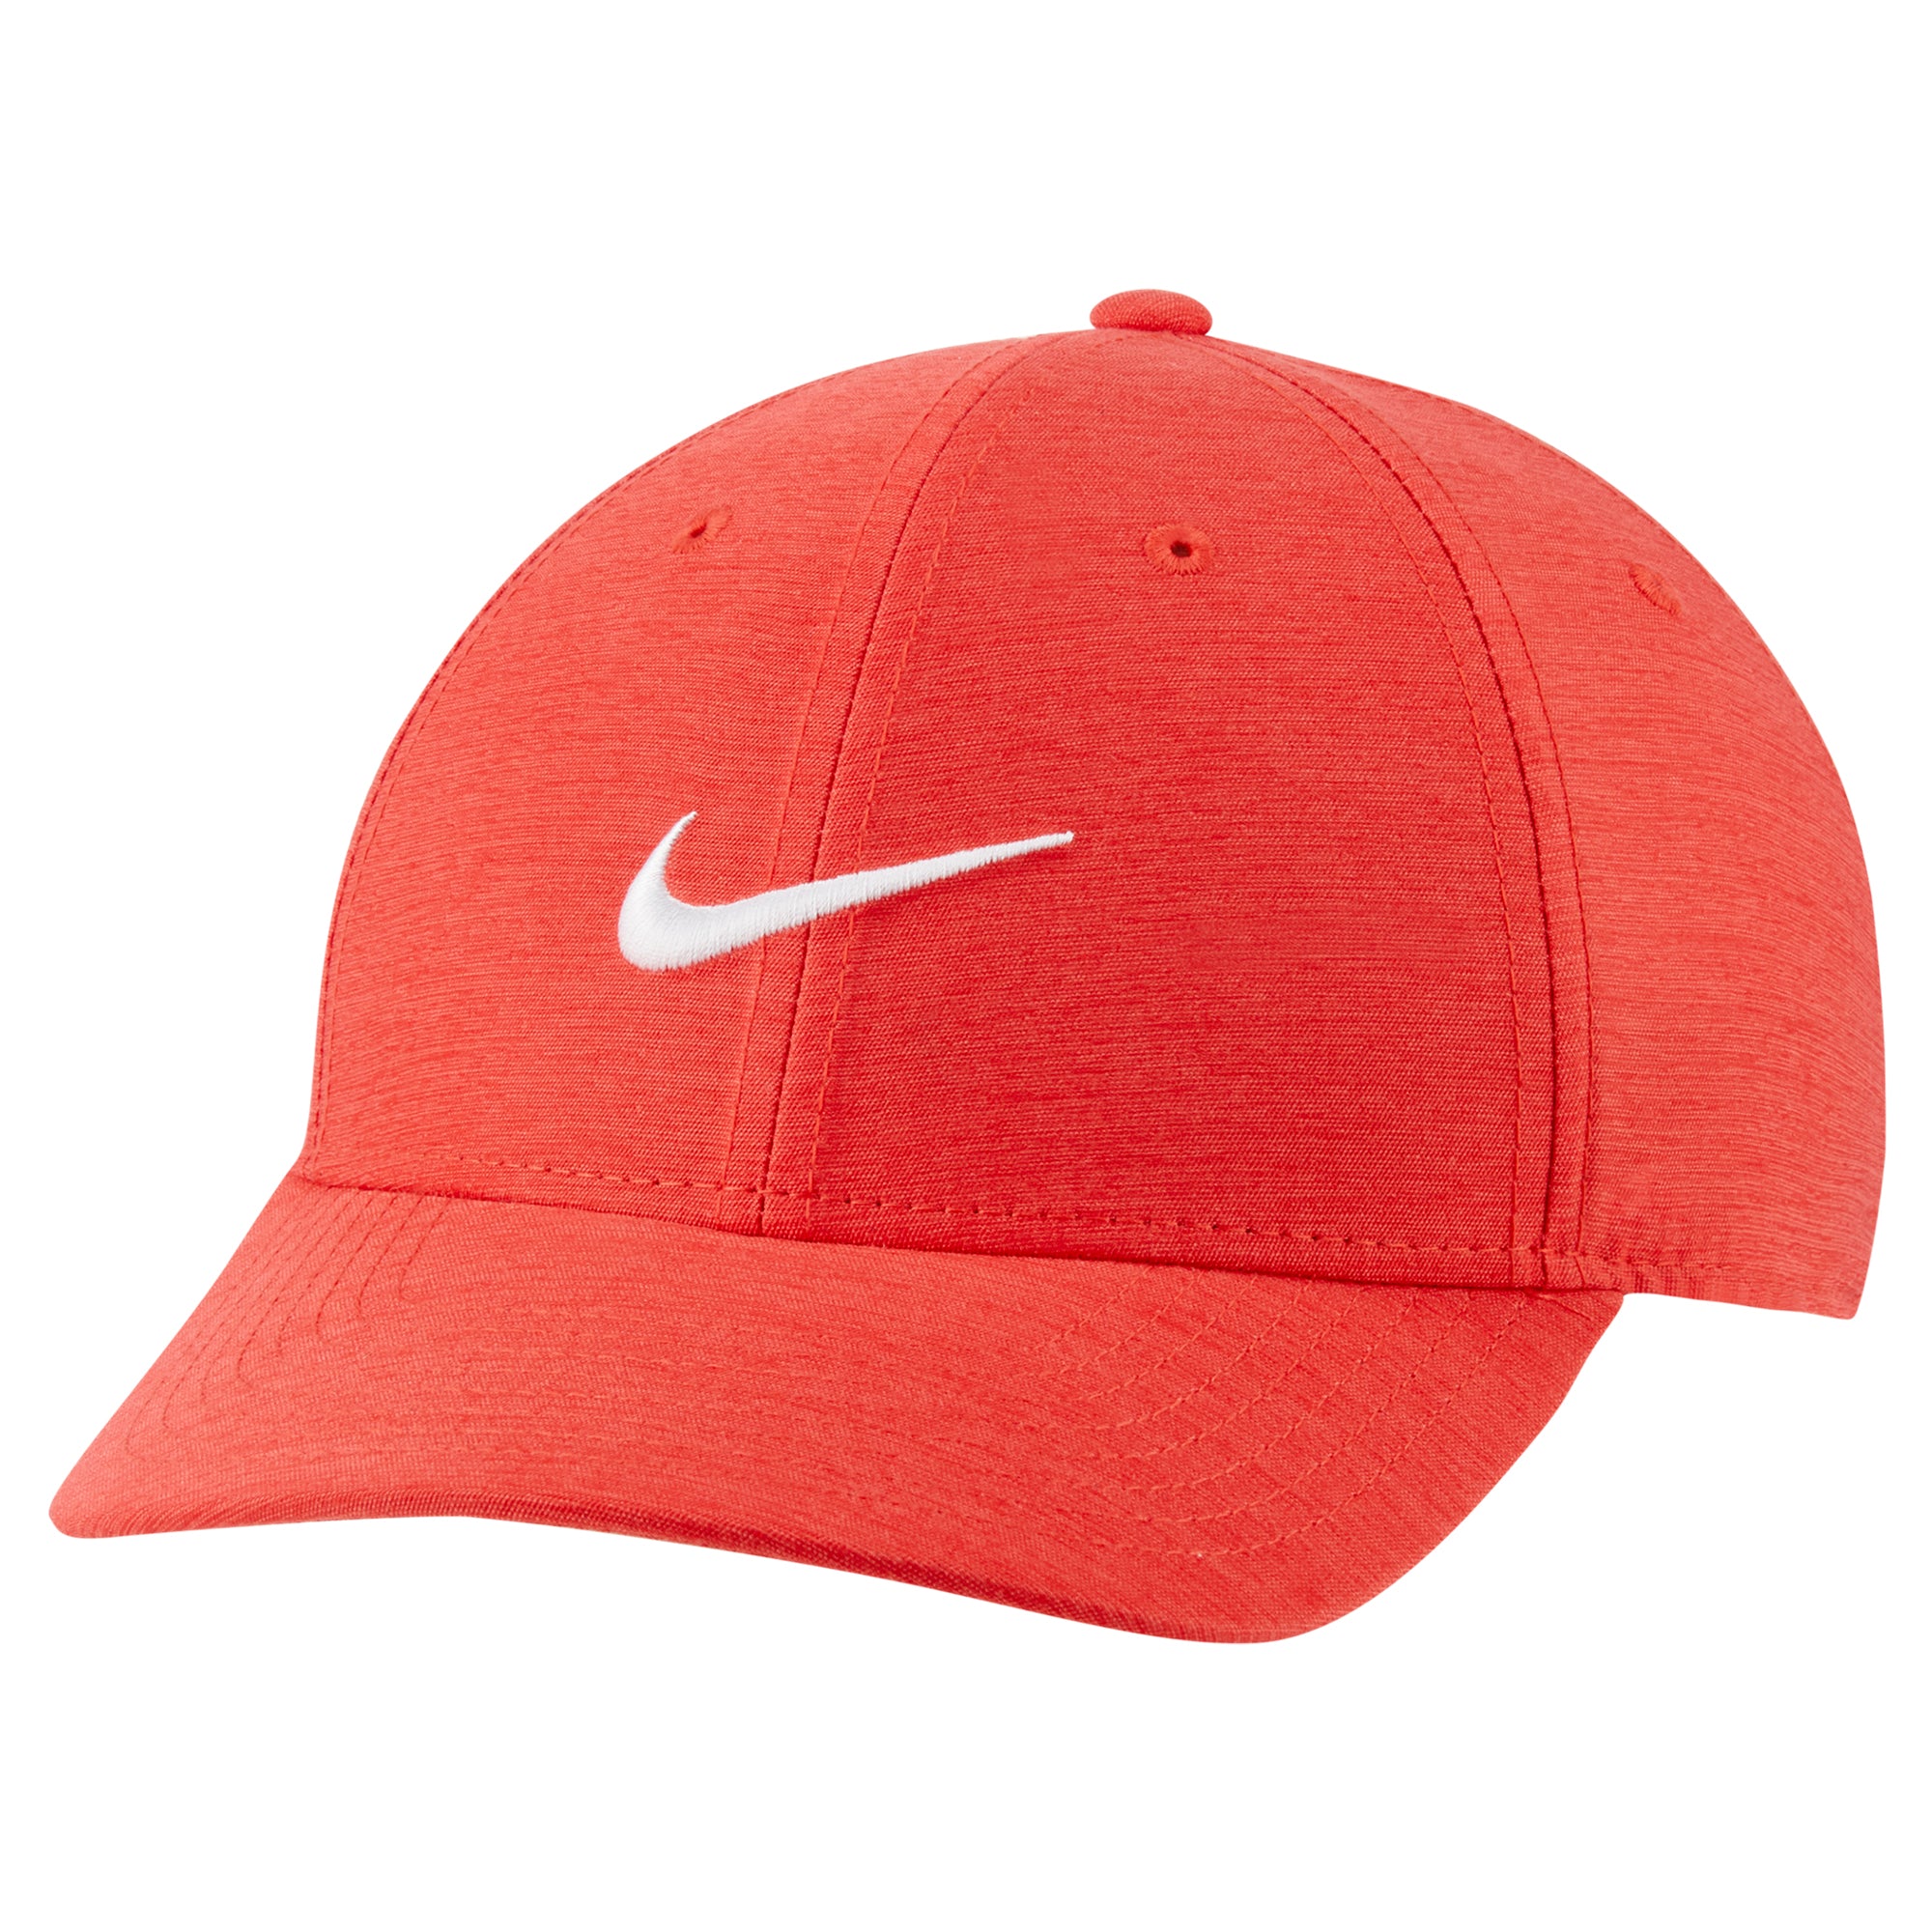 Nike Golf Legacy 91 Novelty Cap CU9892 Track Red 631 | Function18